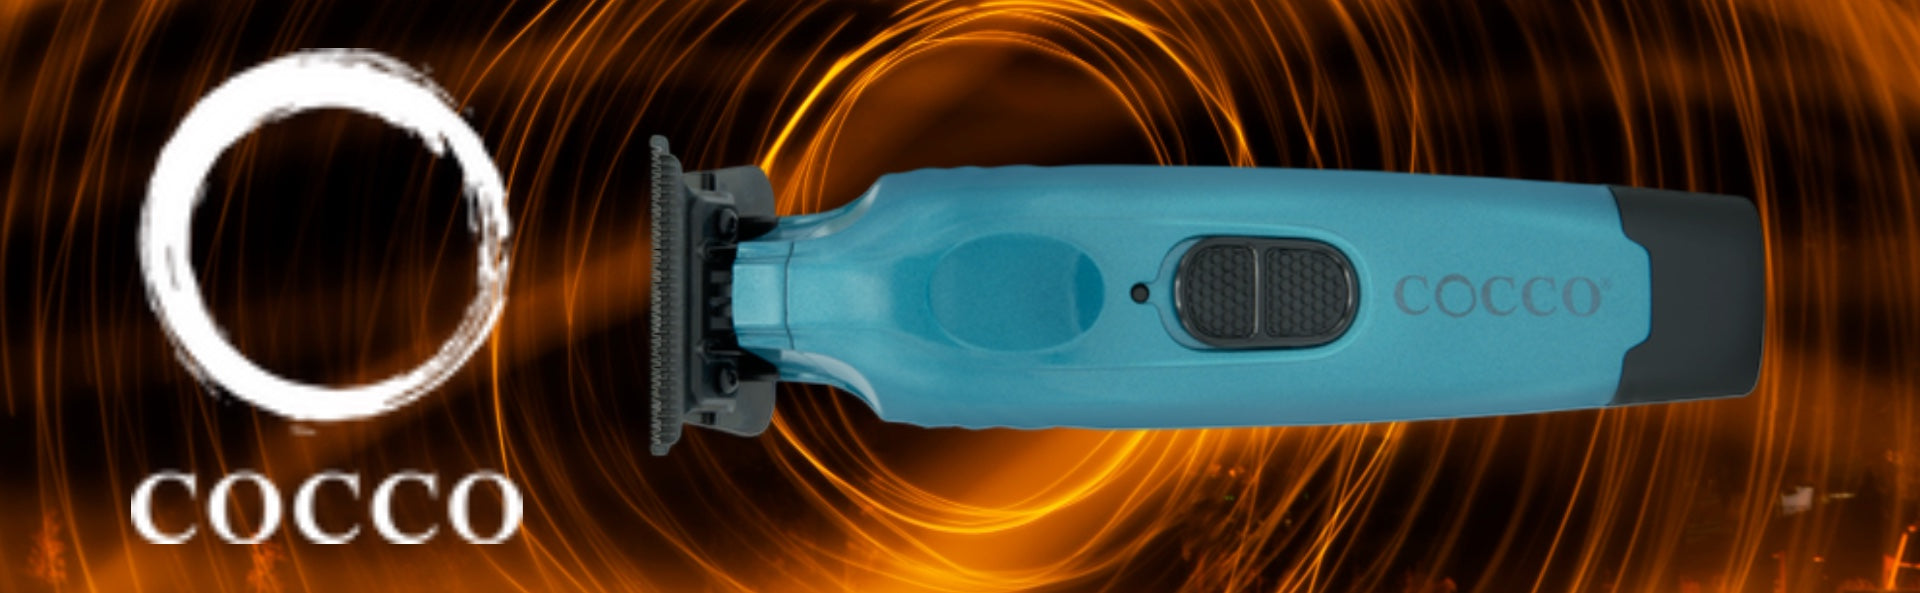 Cocco Hyper Veloce Pro Trimmer in Elegant Dark Teal with High-Torque Motor and DLC Blade